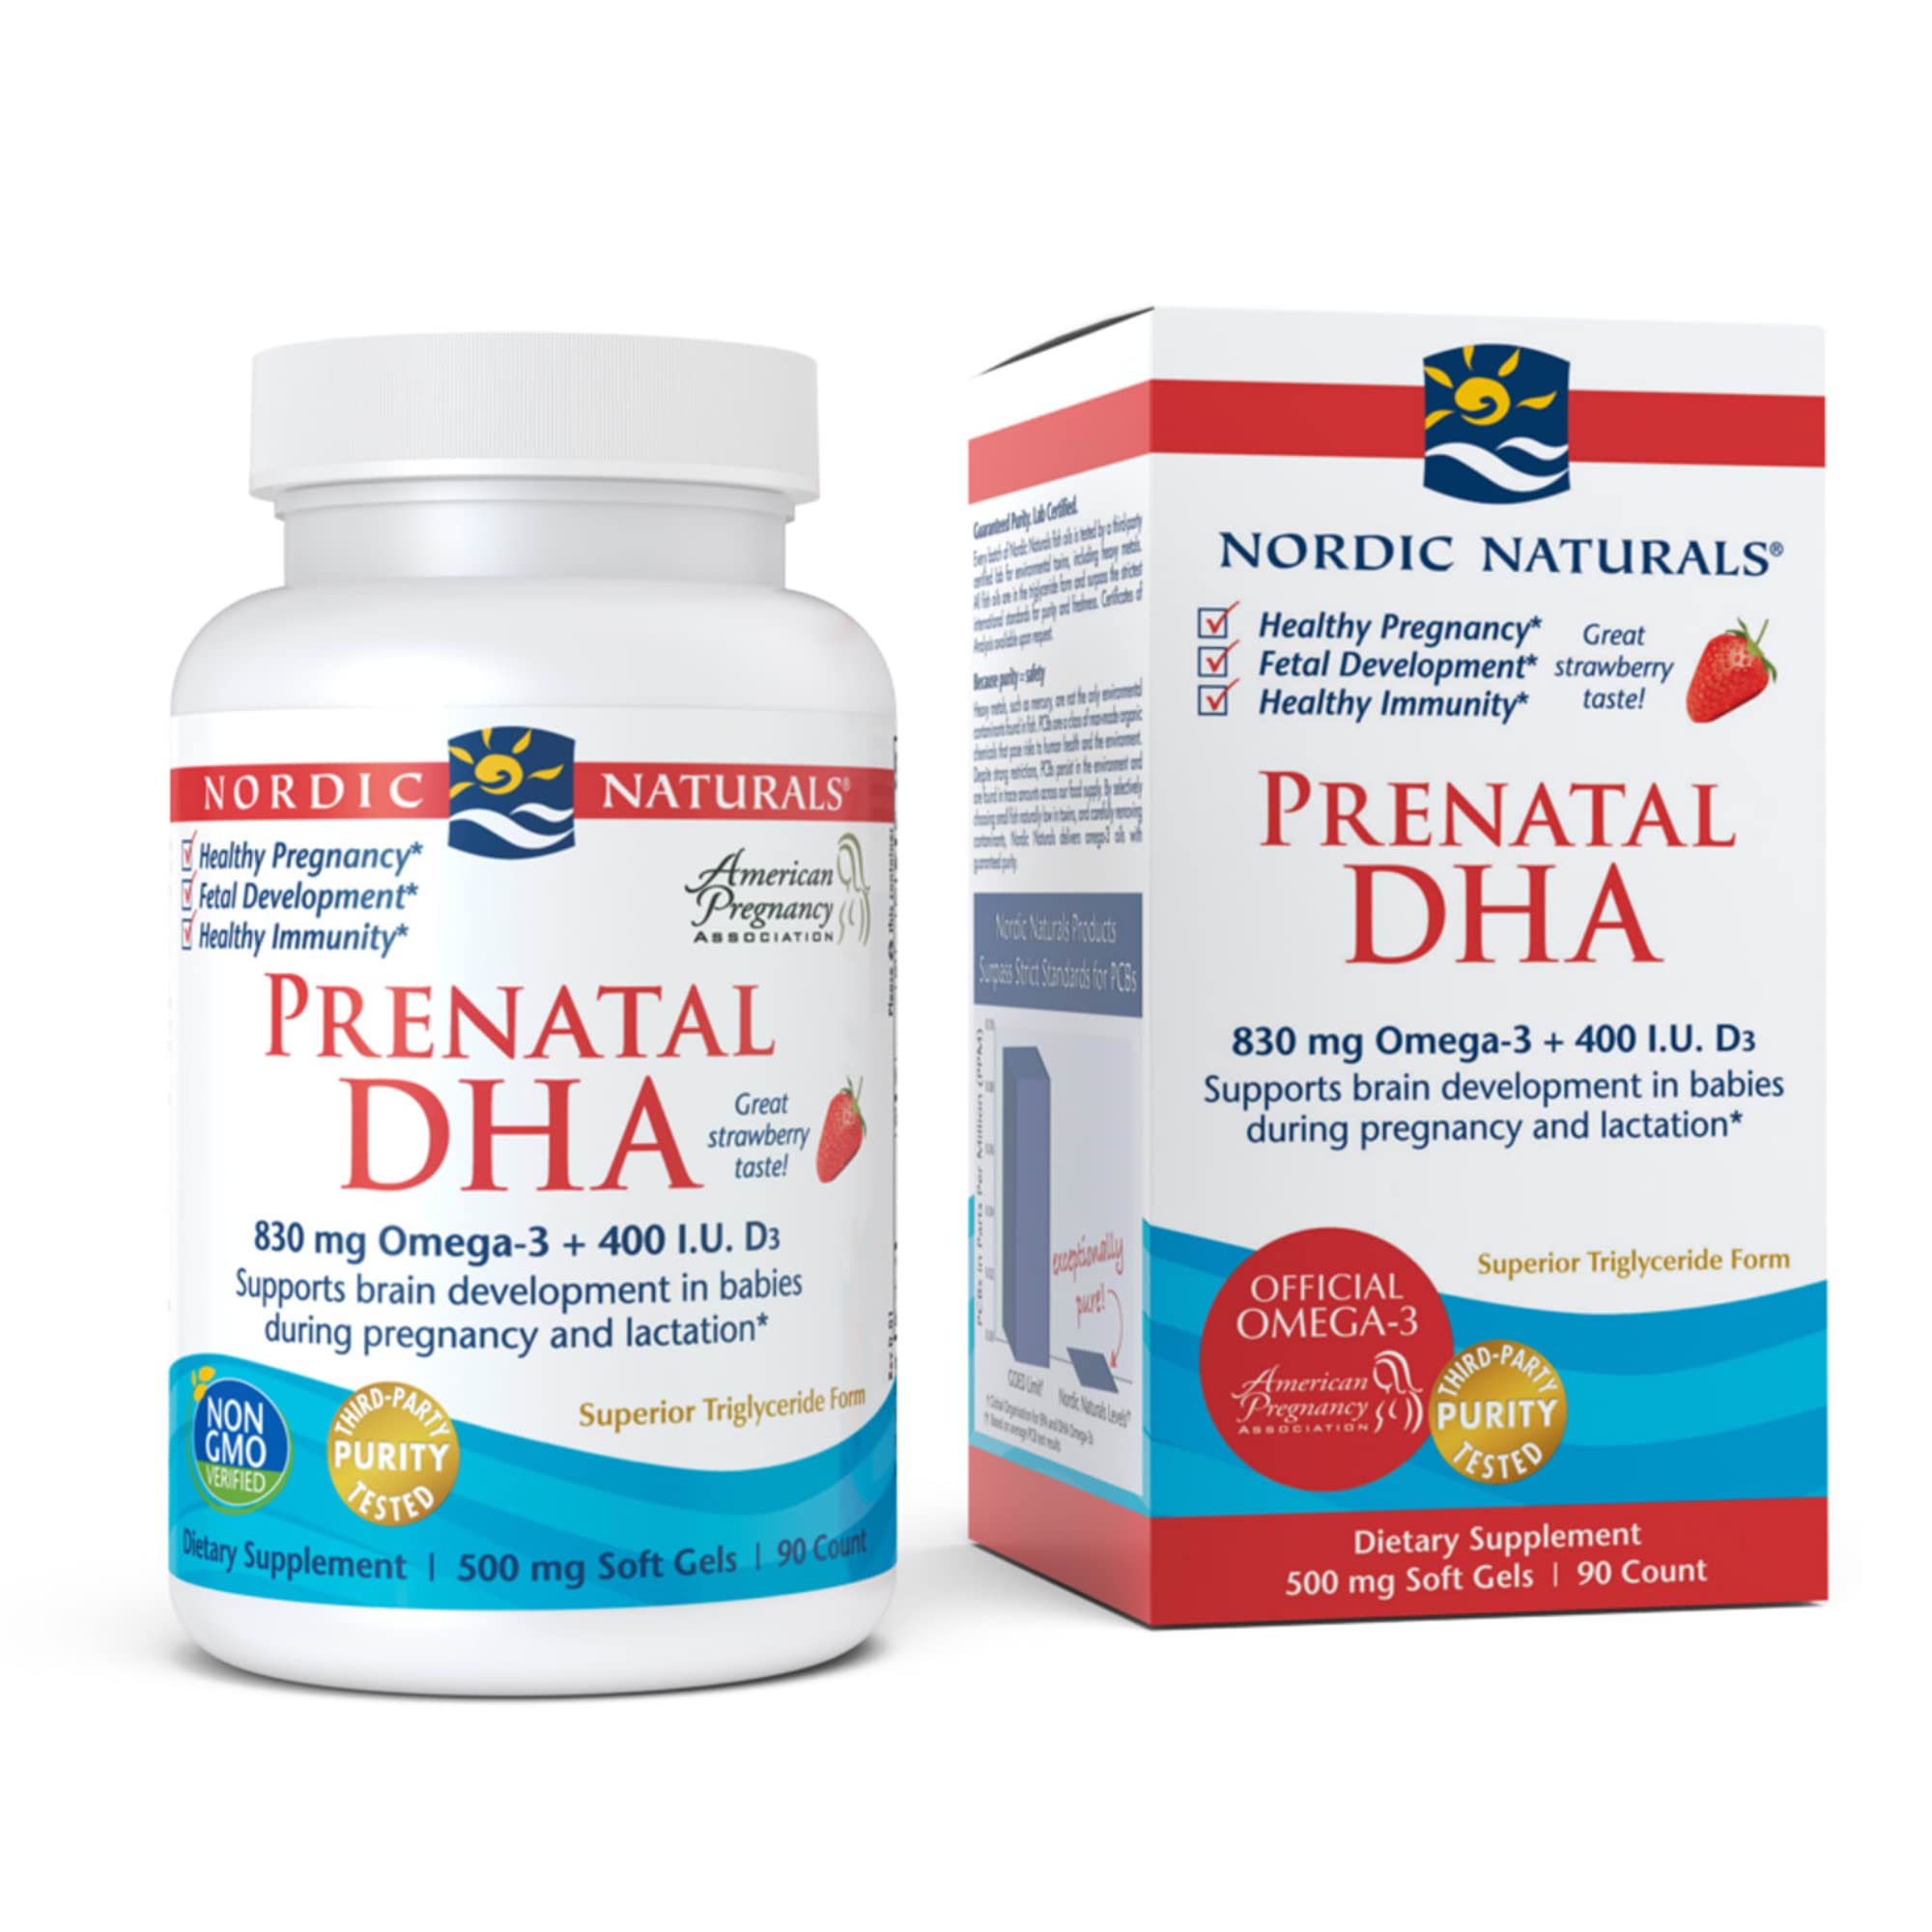 Nordic Naturals Prenatal DHA, Strawberry - 830 mg Omega-3 + 400 IU Vitamin D3 - 90 Soft Gels - Supports Brain Development in Babies During Pregnancy & Lactation - Non-GMO - 45 Servings